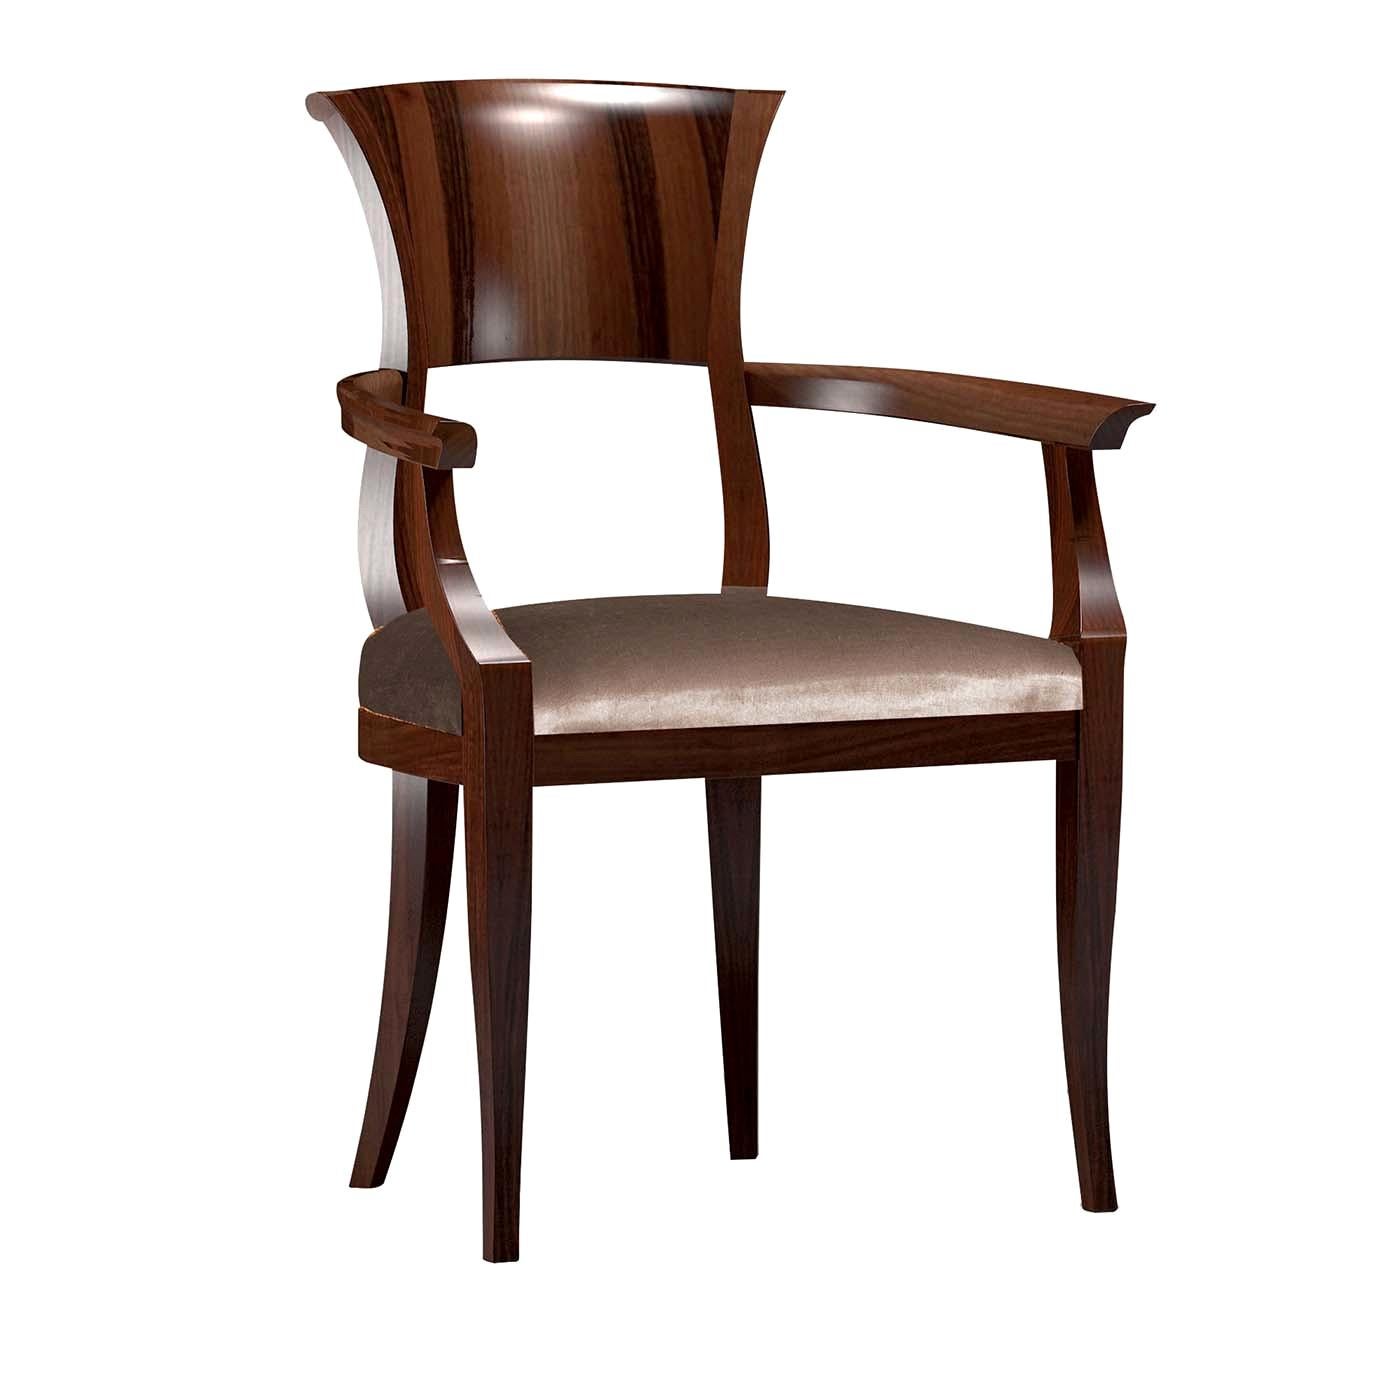 White and Gold Dining Chair